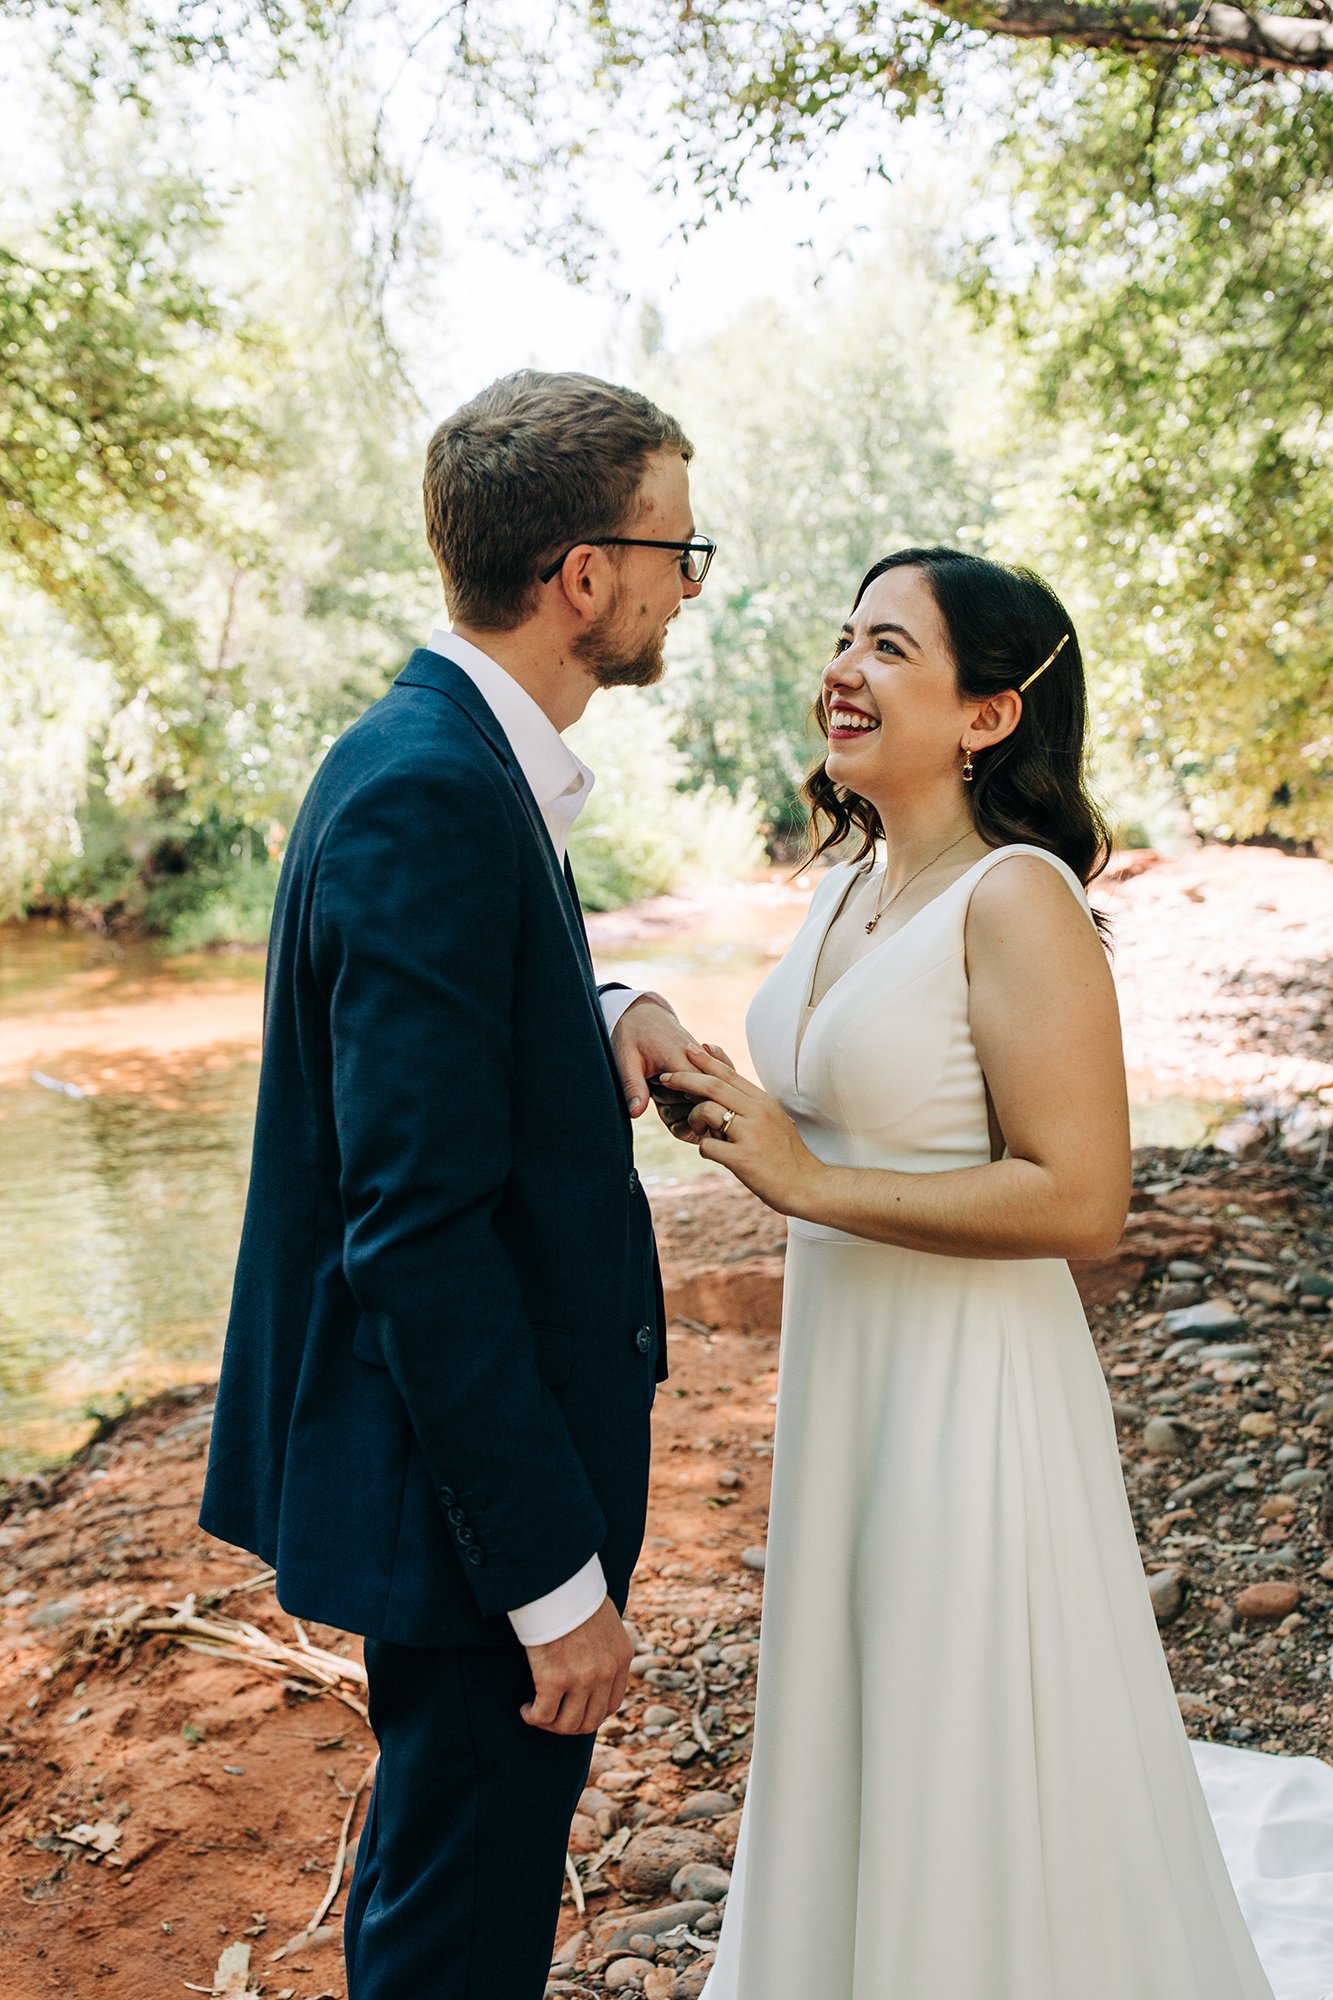 A close-up photo of Steph smiling at her groom, Matt, during her Sedona wedding day